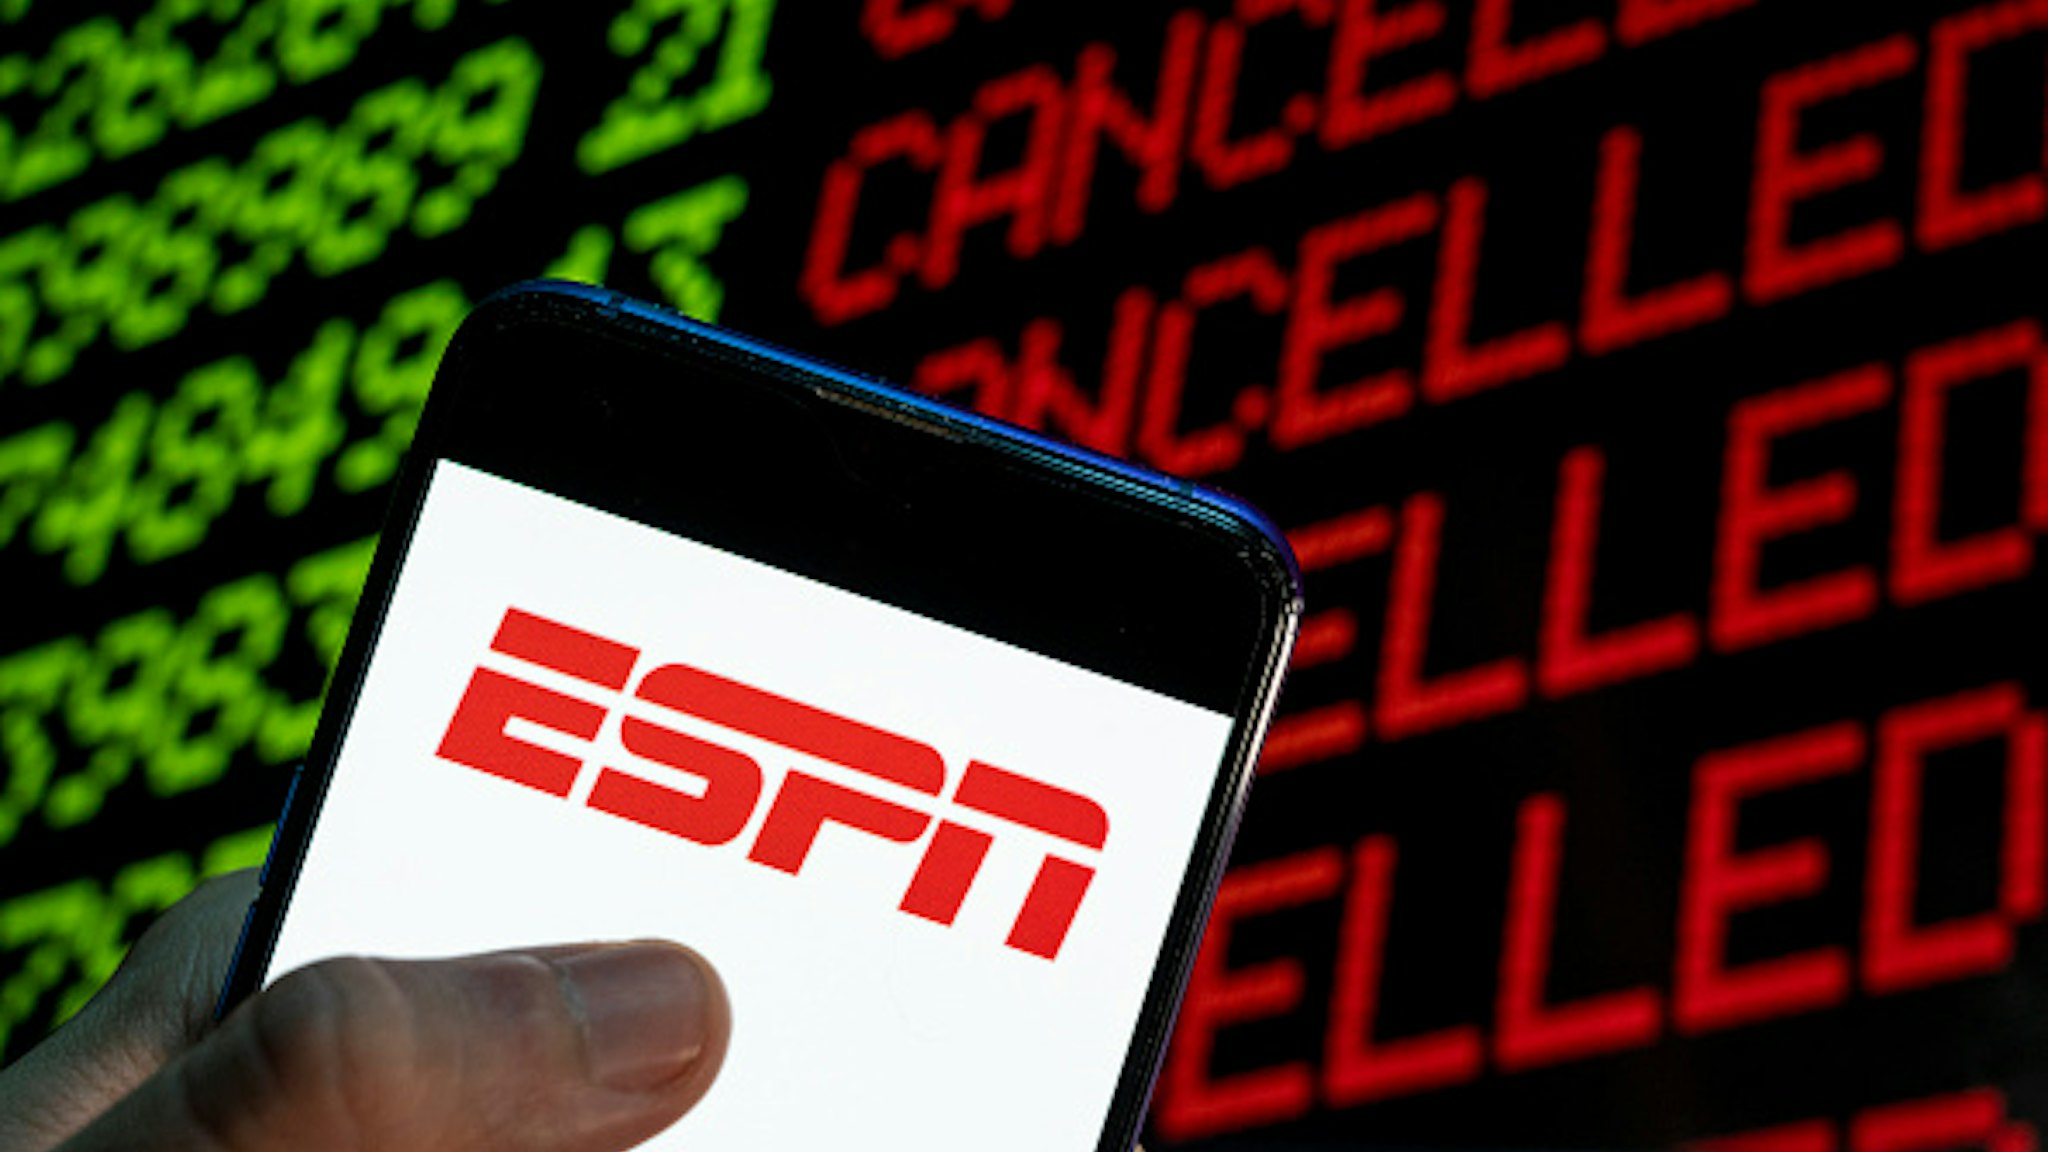 CHINA - 2021/04/24: In this photo illustration the American sports television channel ESPN logo is seen on an Android mobile device with the word cancelled on a computer screen.